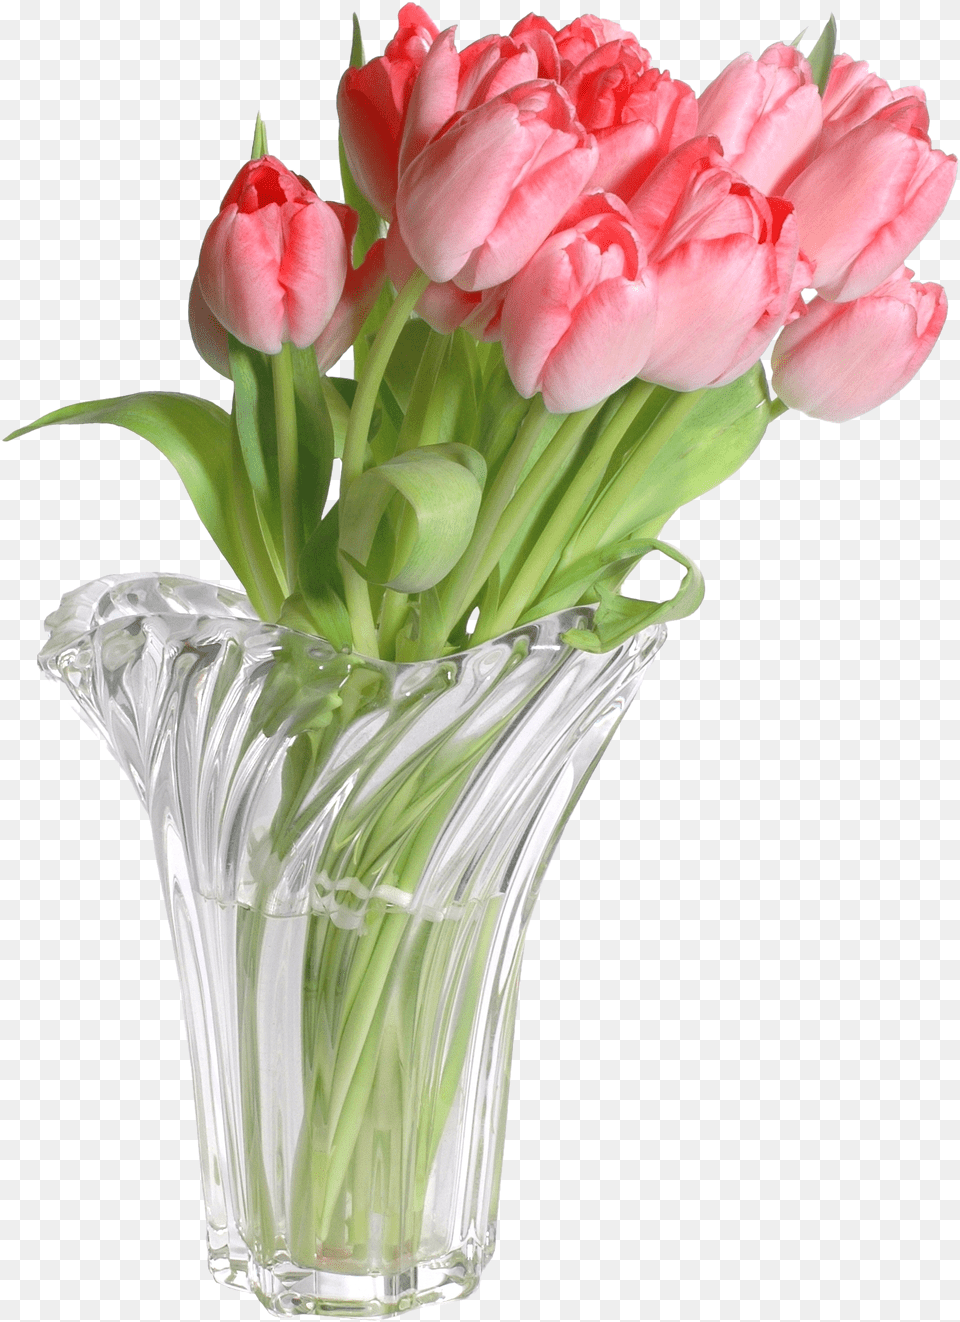 Flower Vases With Bible Verses Flowers In Vase Free Png